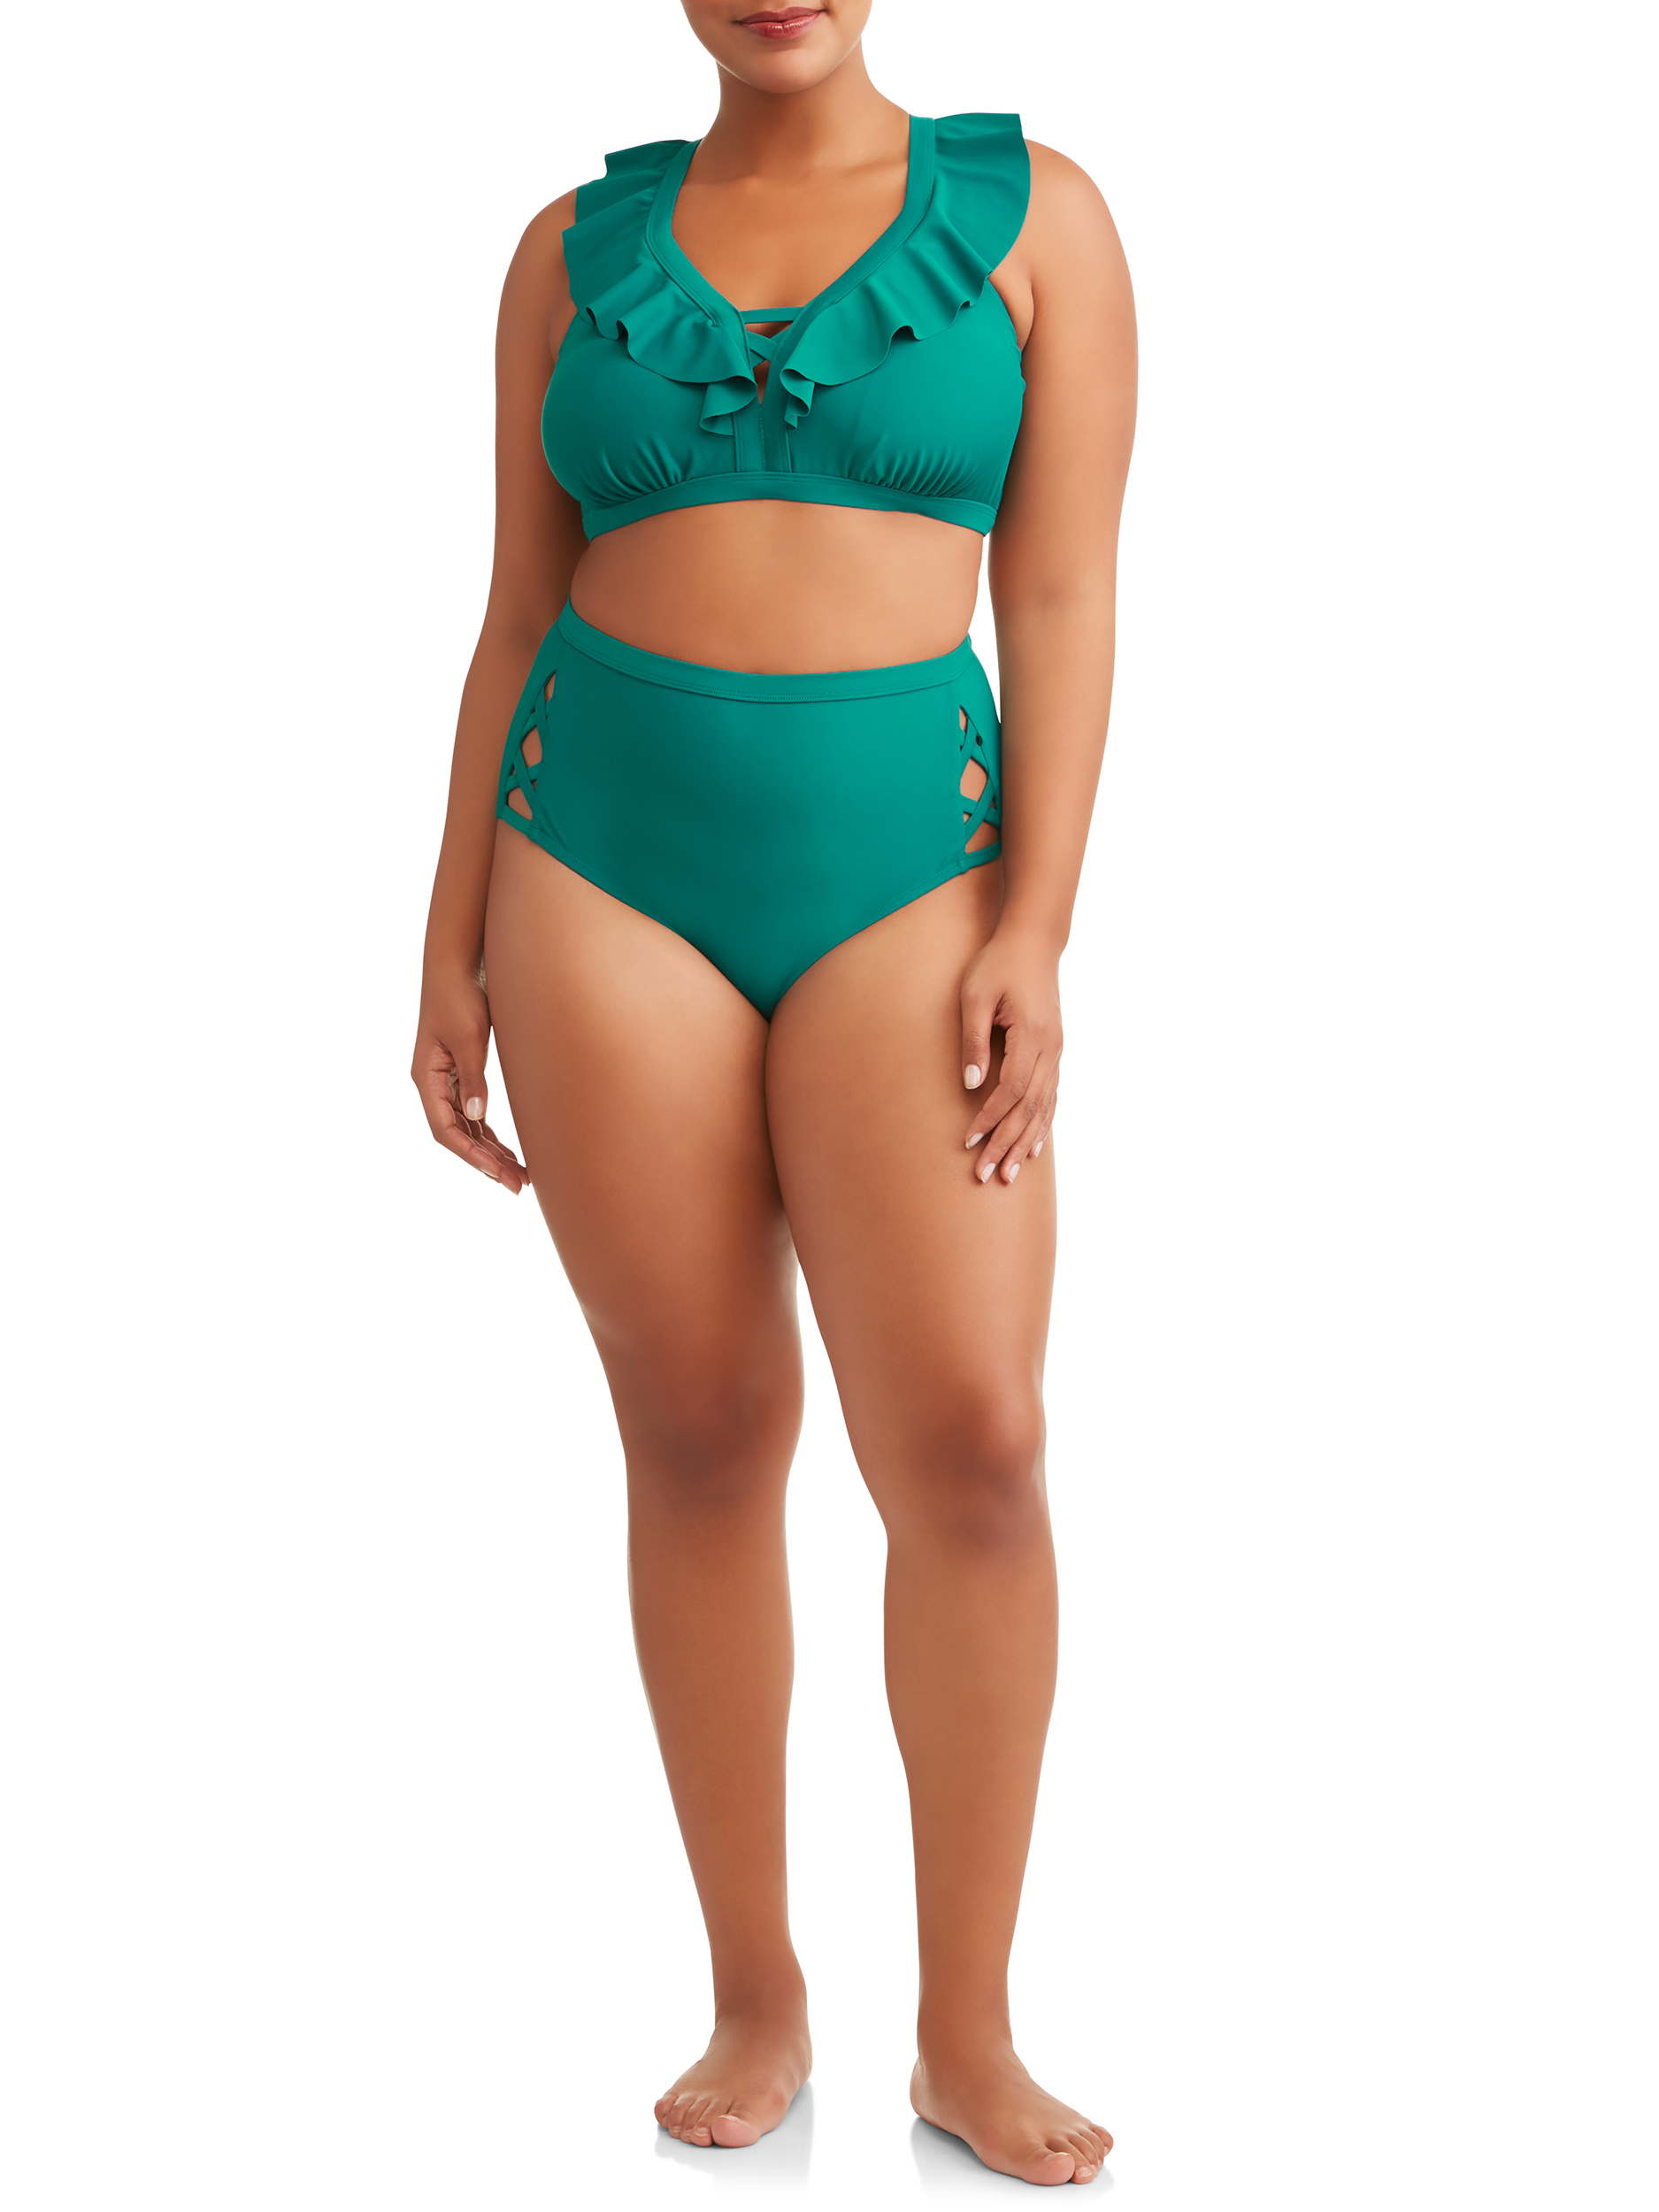 Women's Plus Solid Cabo Swimsuit Bottom - image 2 of 4